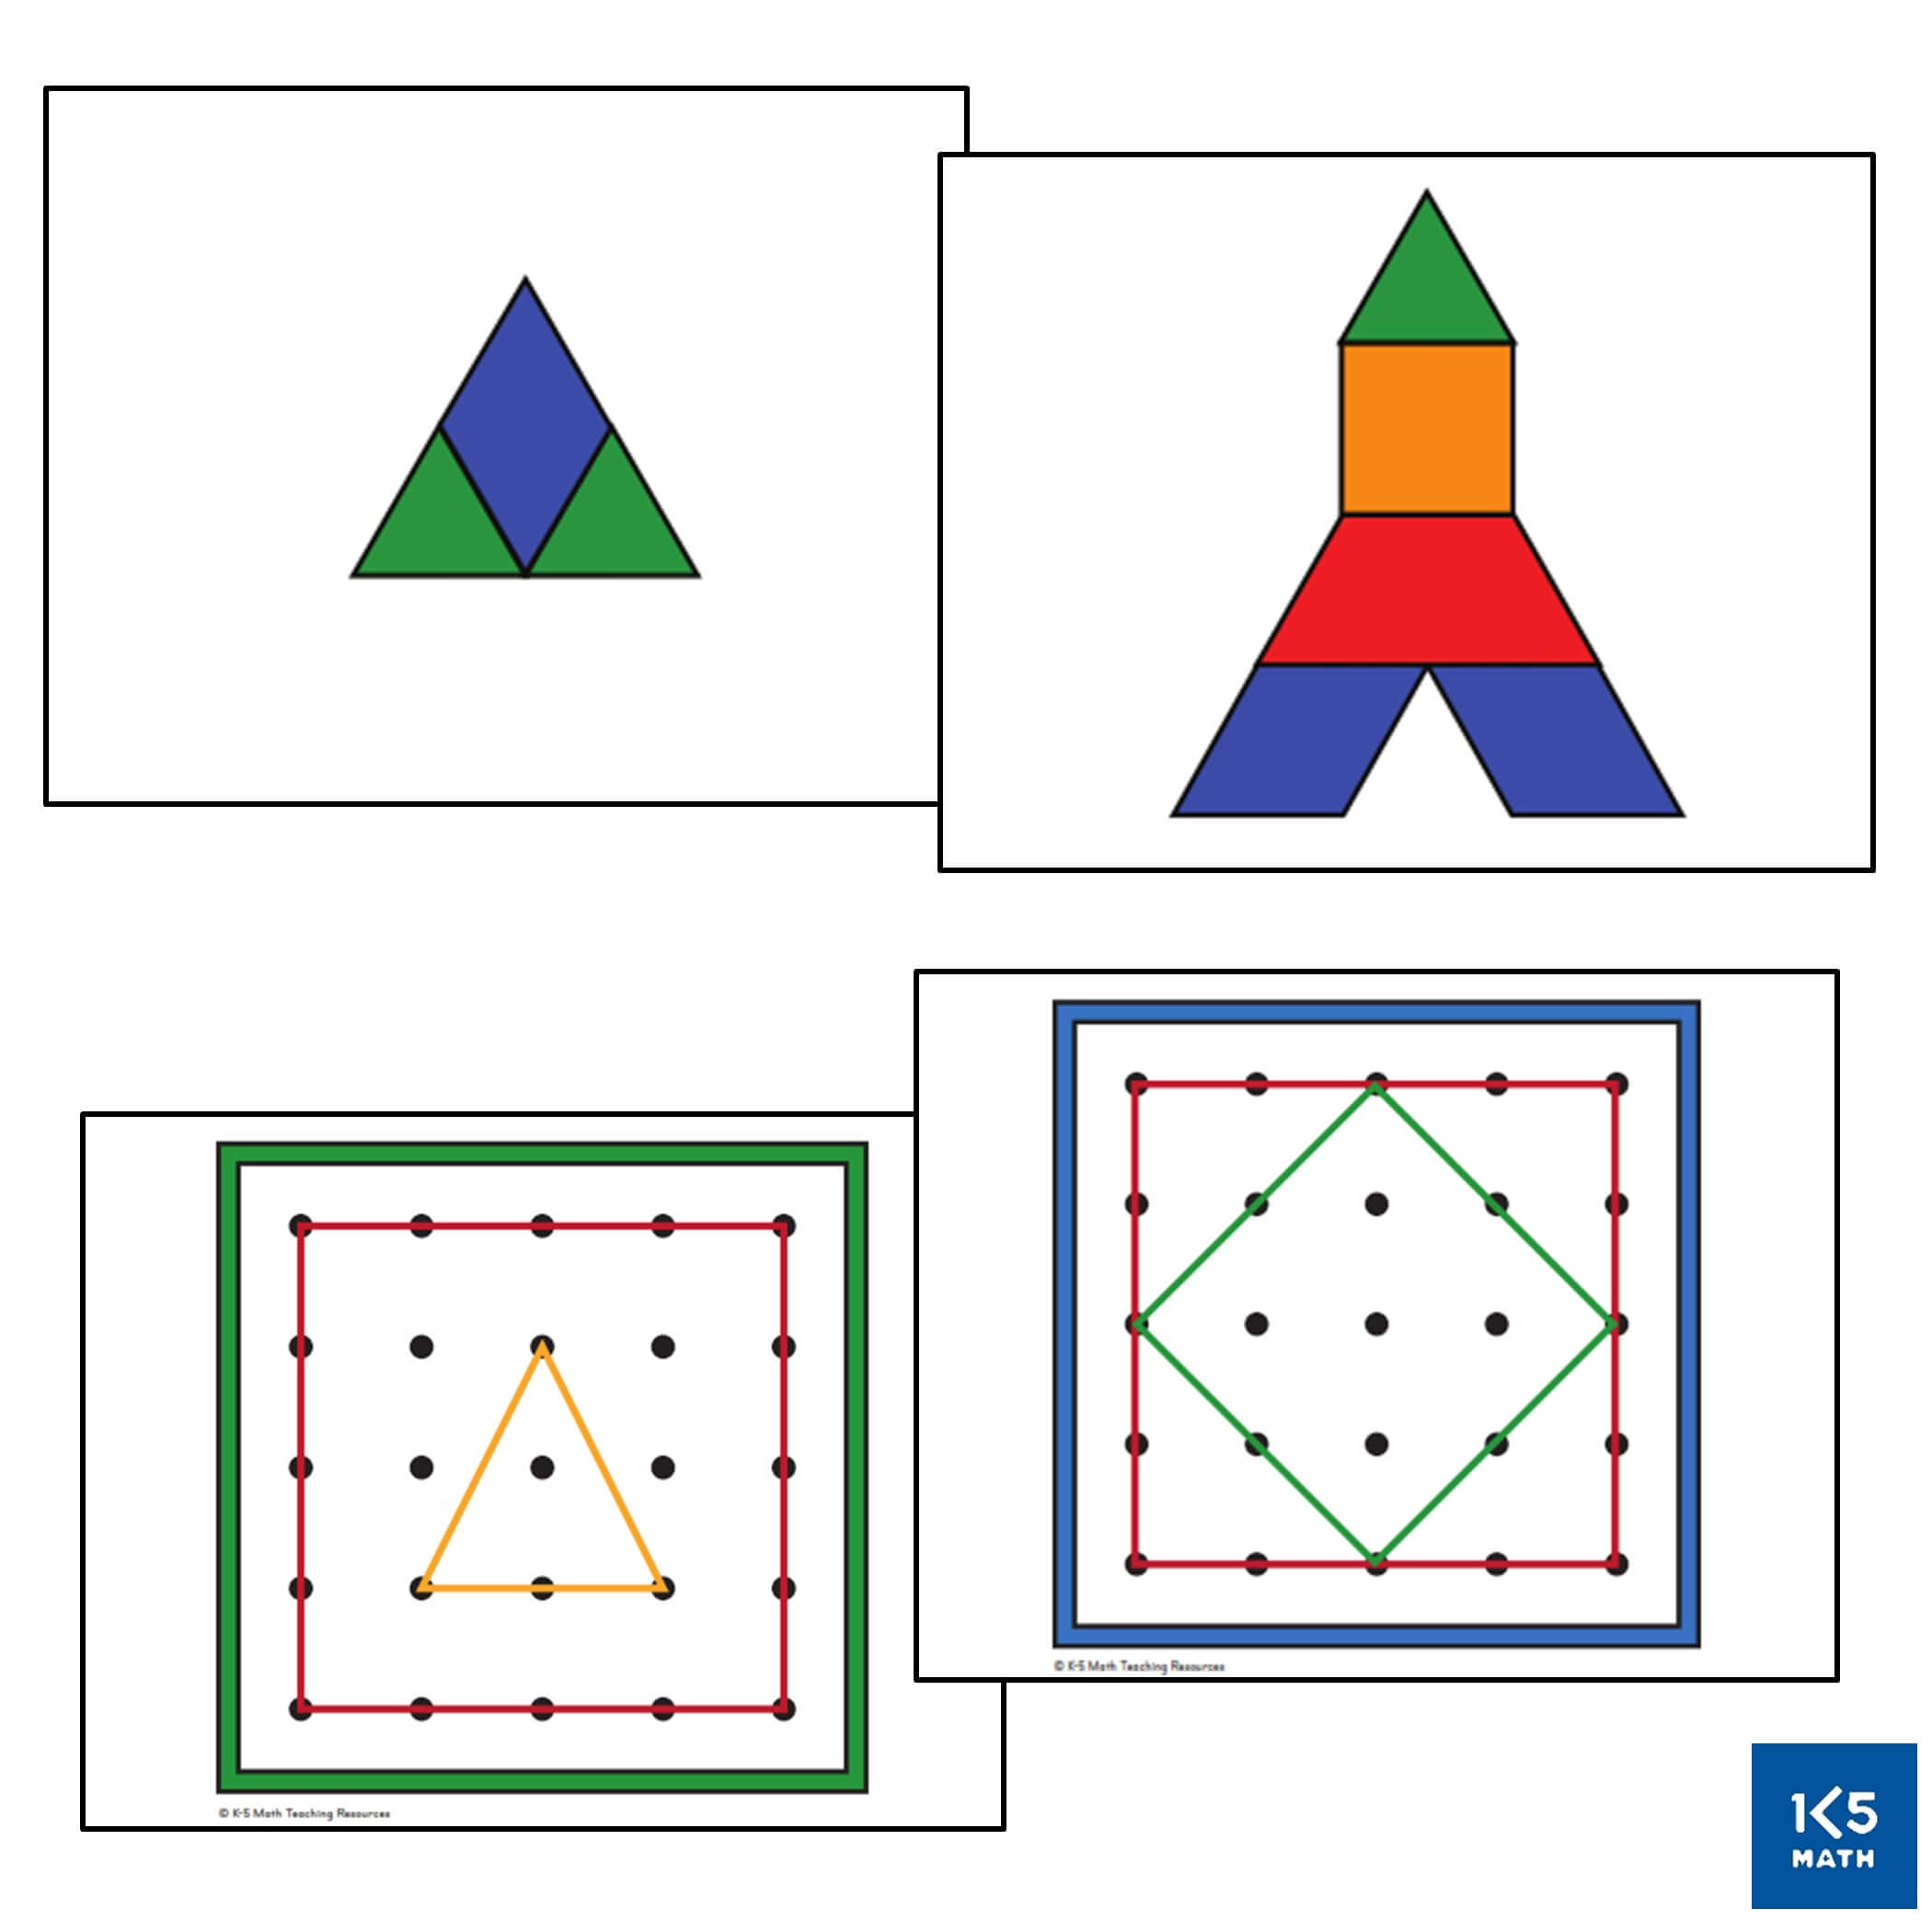 Quick Images with pattern blocks, tangrams and geoboards can be used to build geometric reasoning.